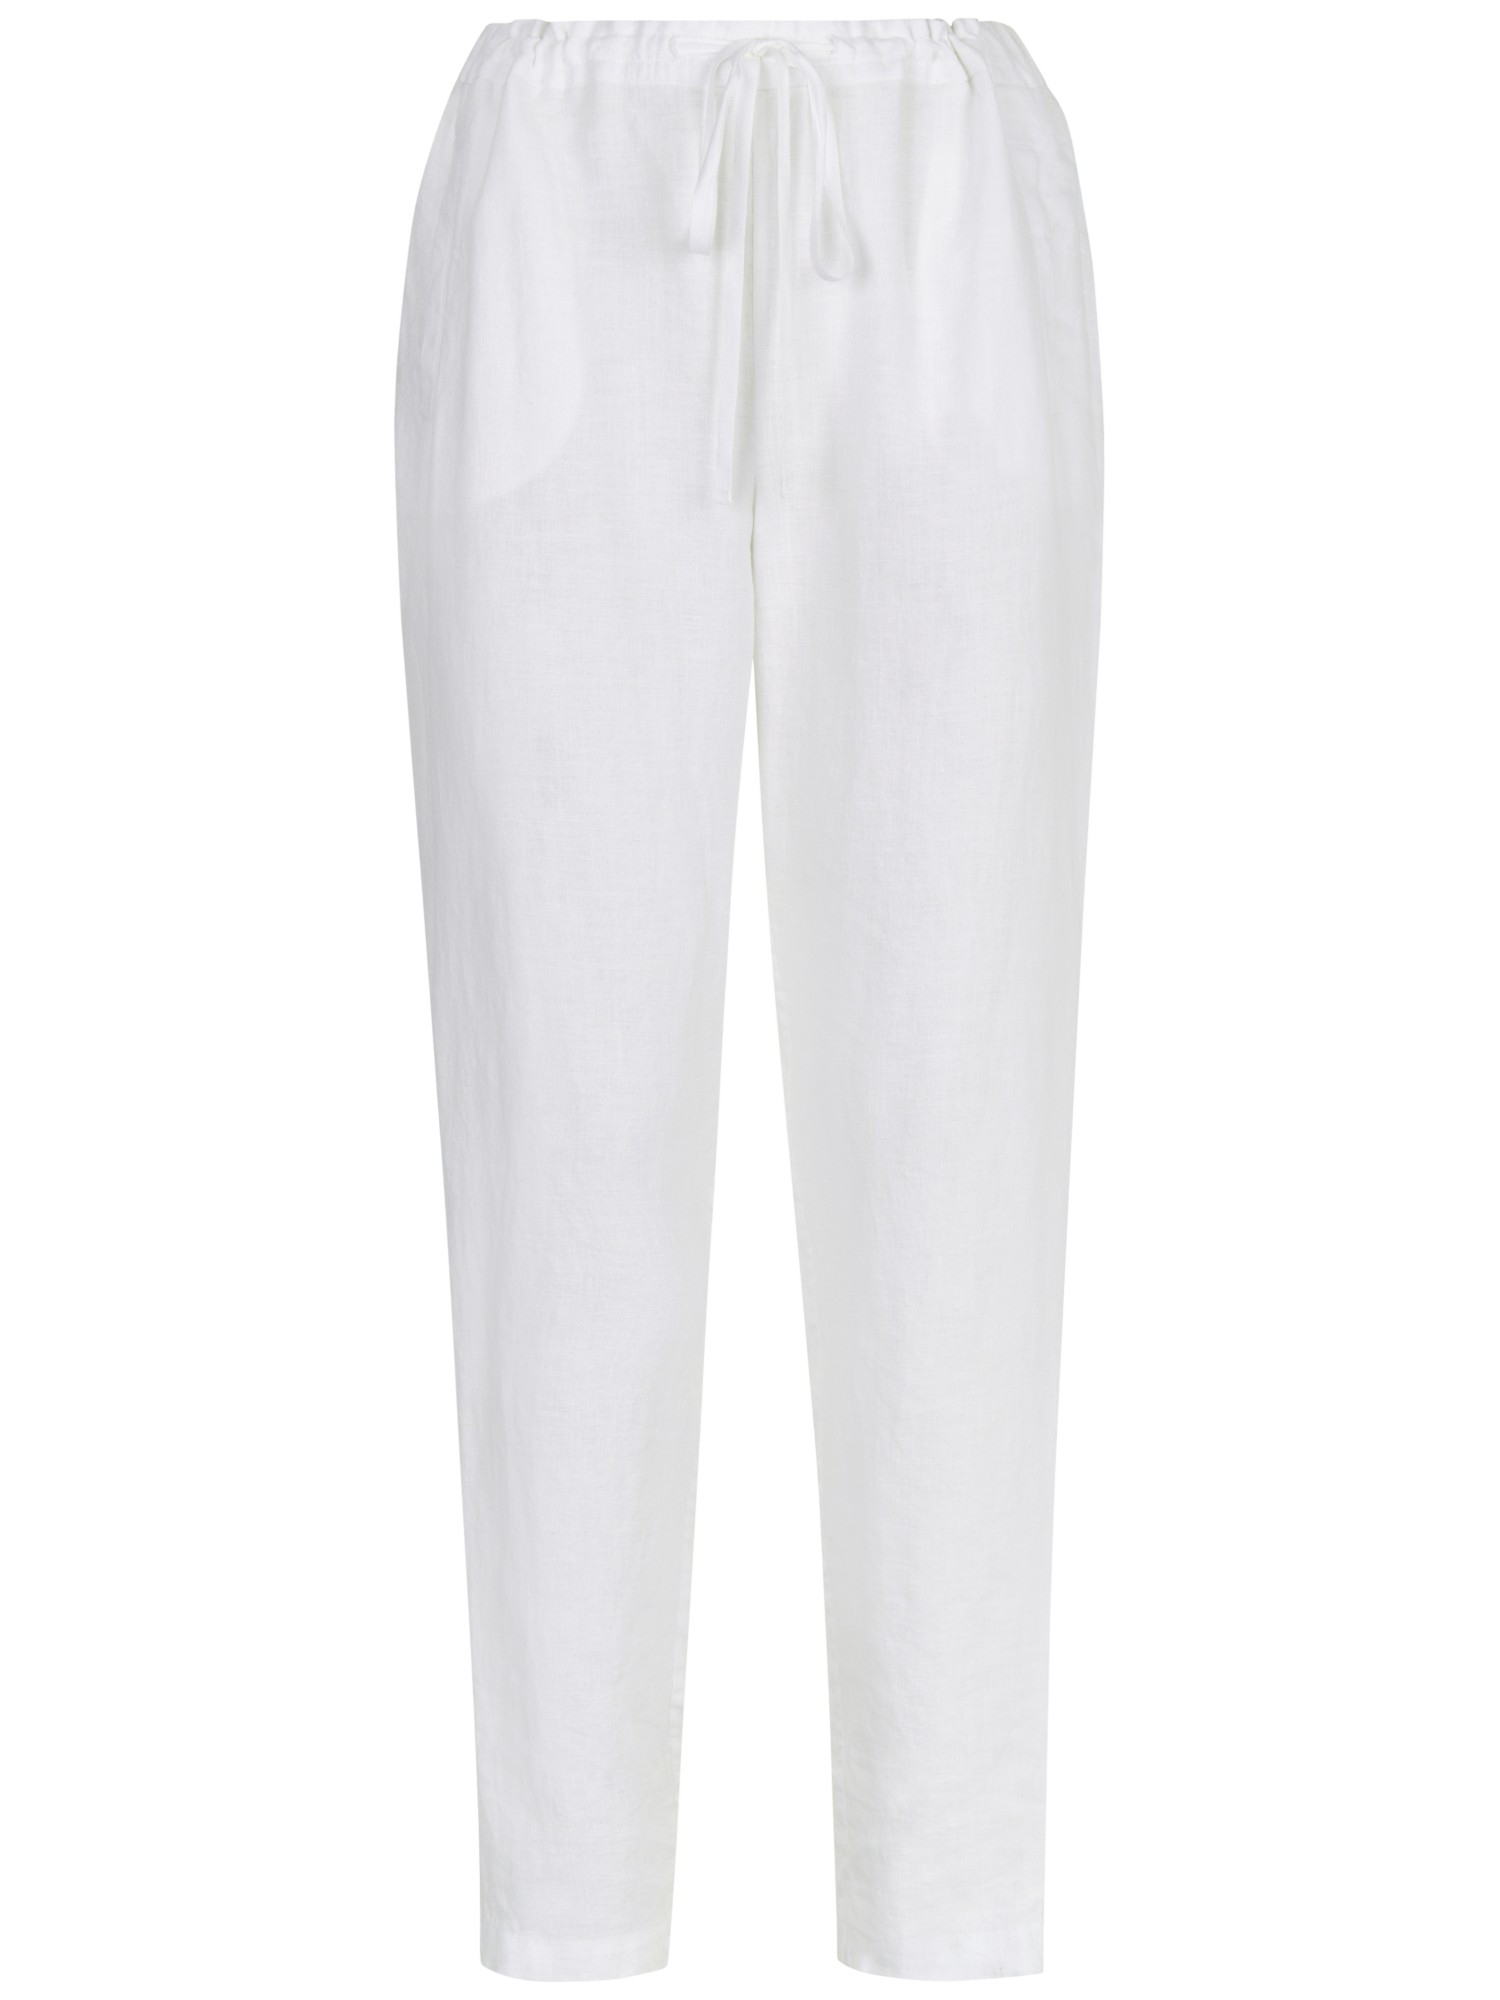 Jaeger Linen Drawstring Trousers in White | Lyst